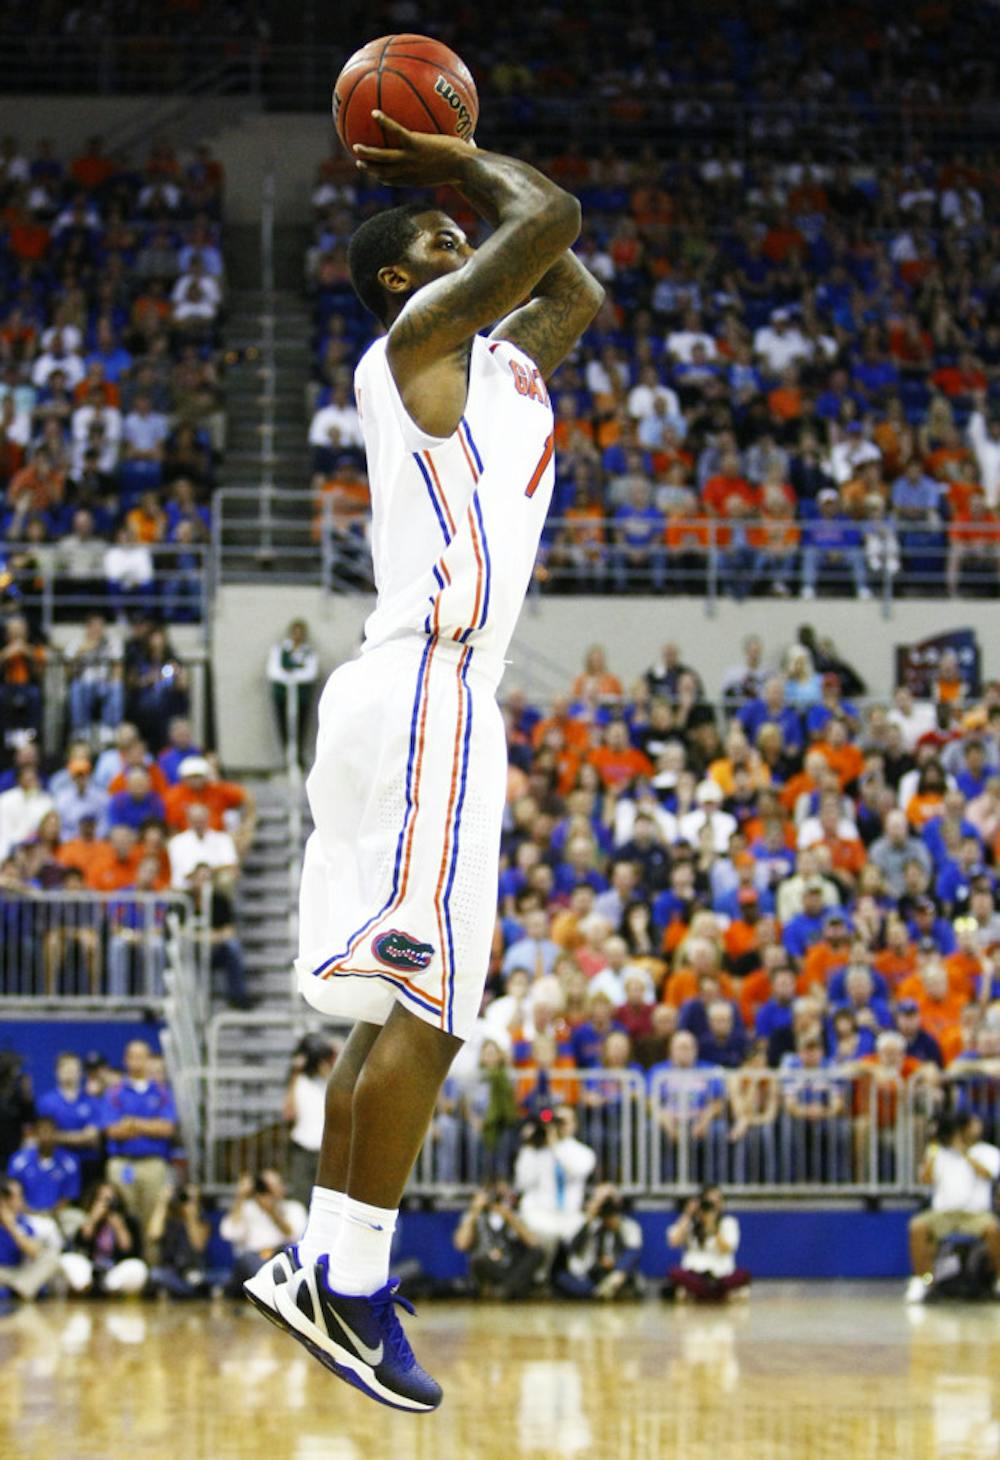 <p>Kenny Boynton attempts a shot during Florida’s 69-52 victory against Kentucky on Feb. 12 at the O’Connell Center.</p>